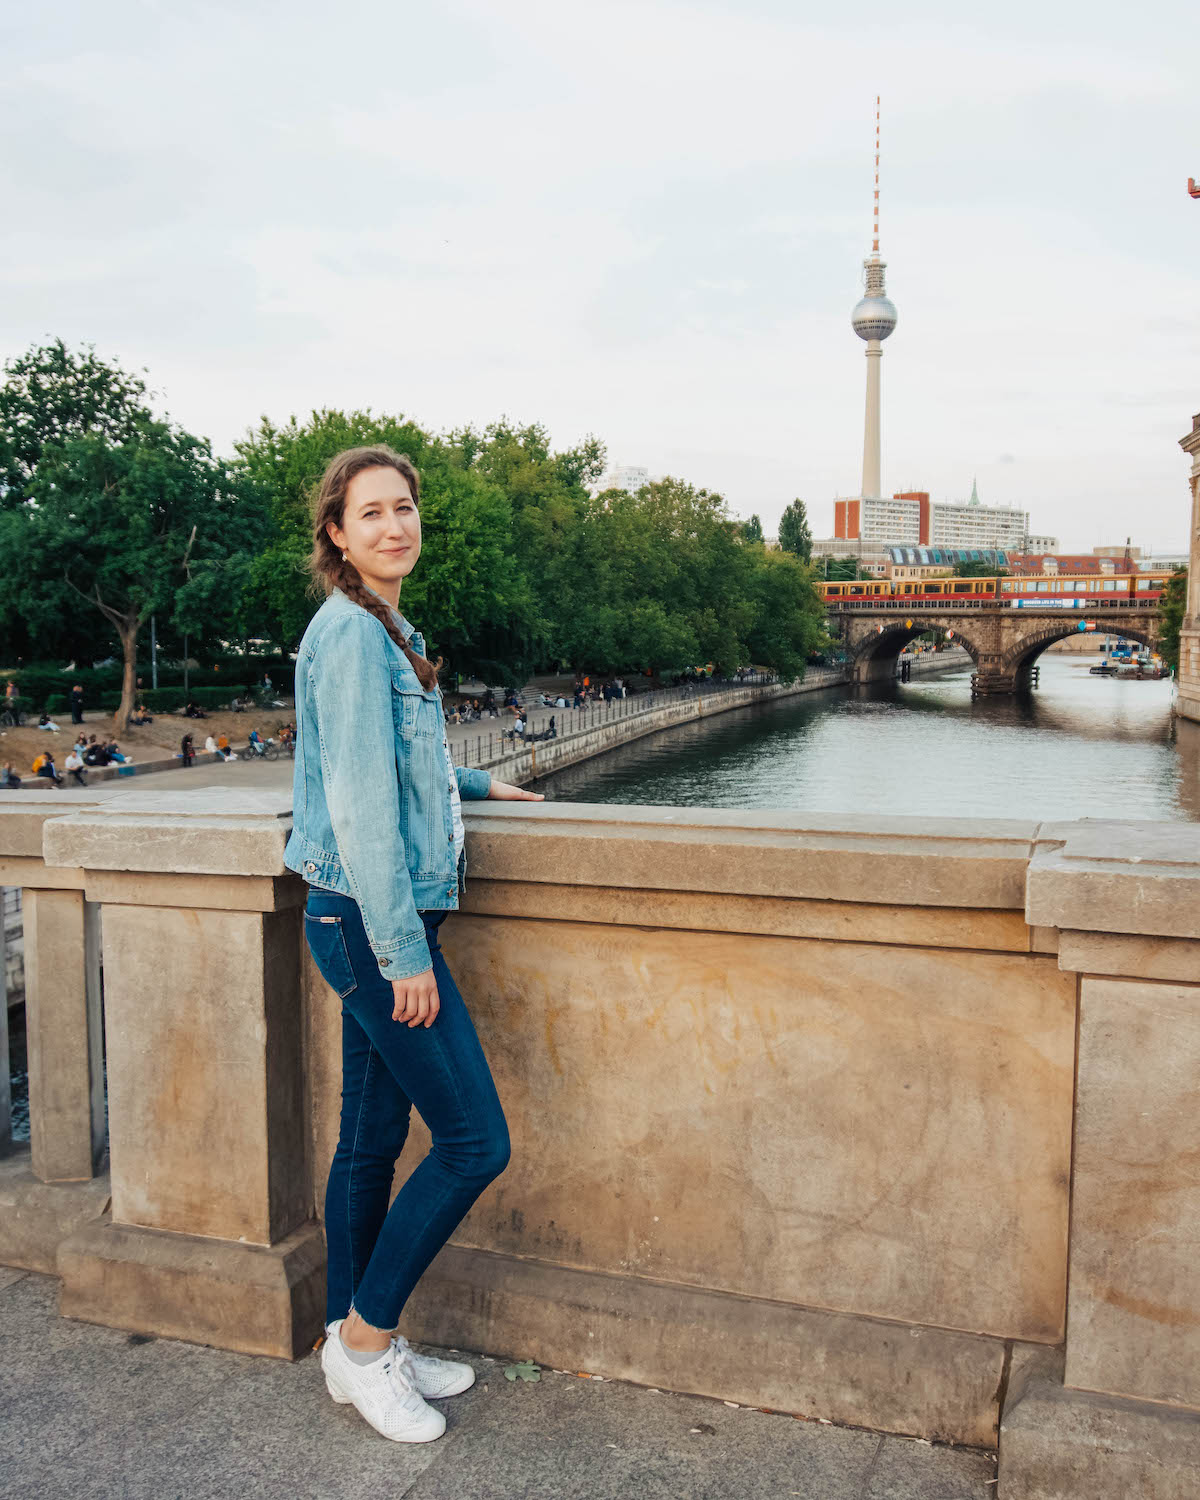 Woman standing on bridge with Berlin TV tower in the distance. 